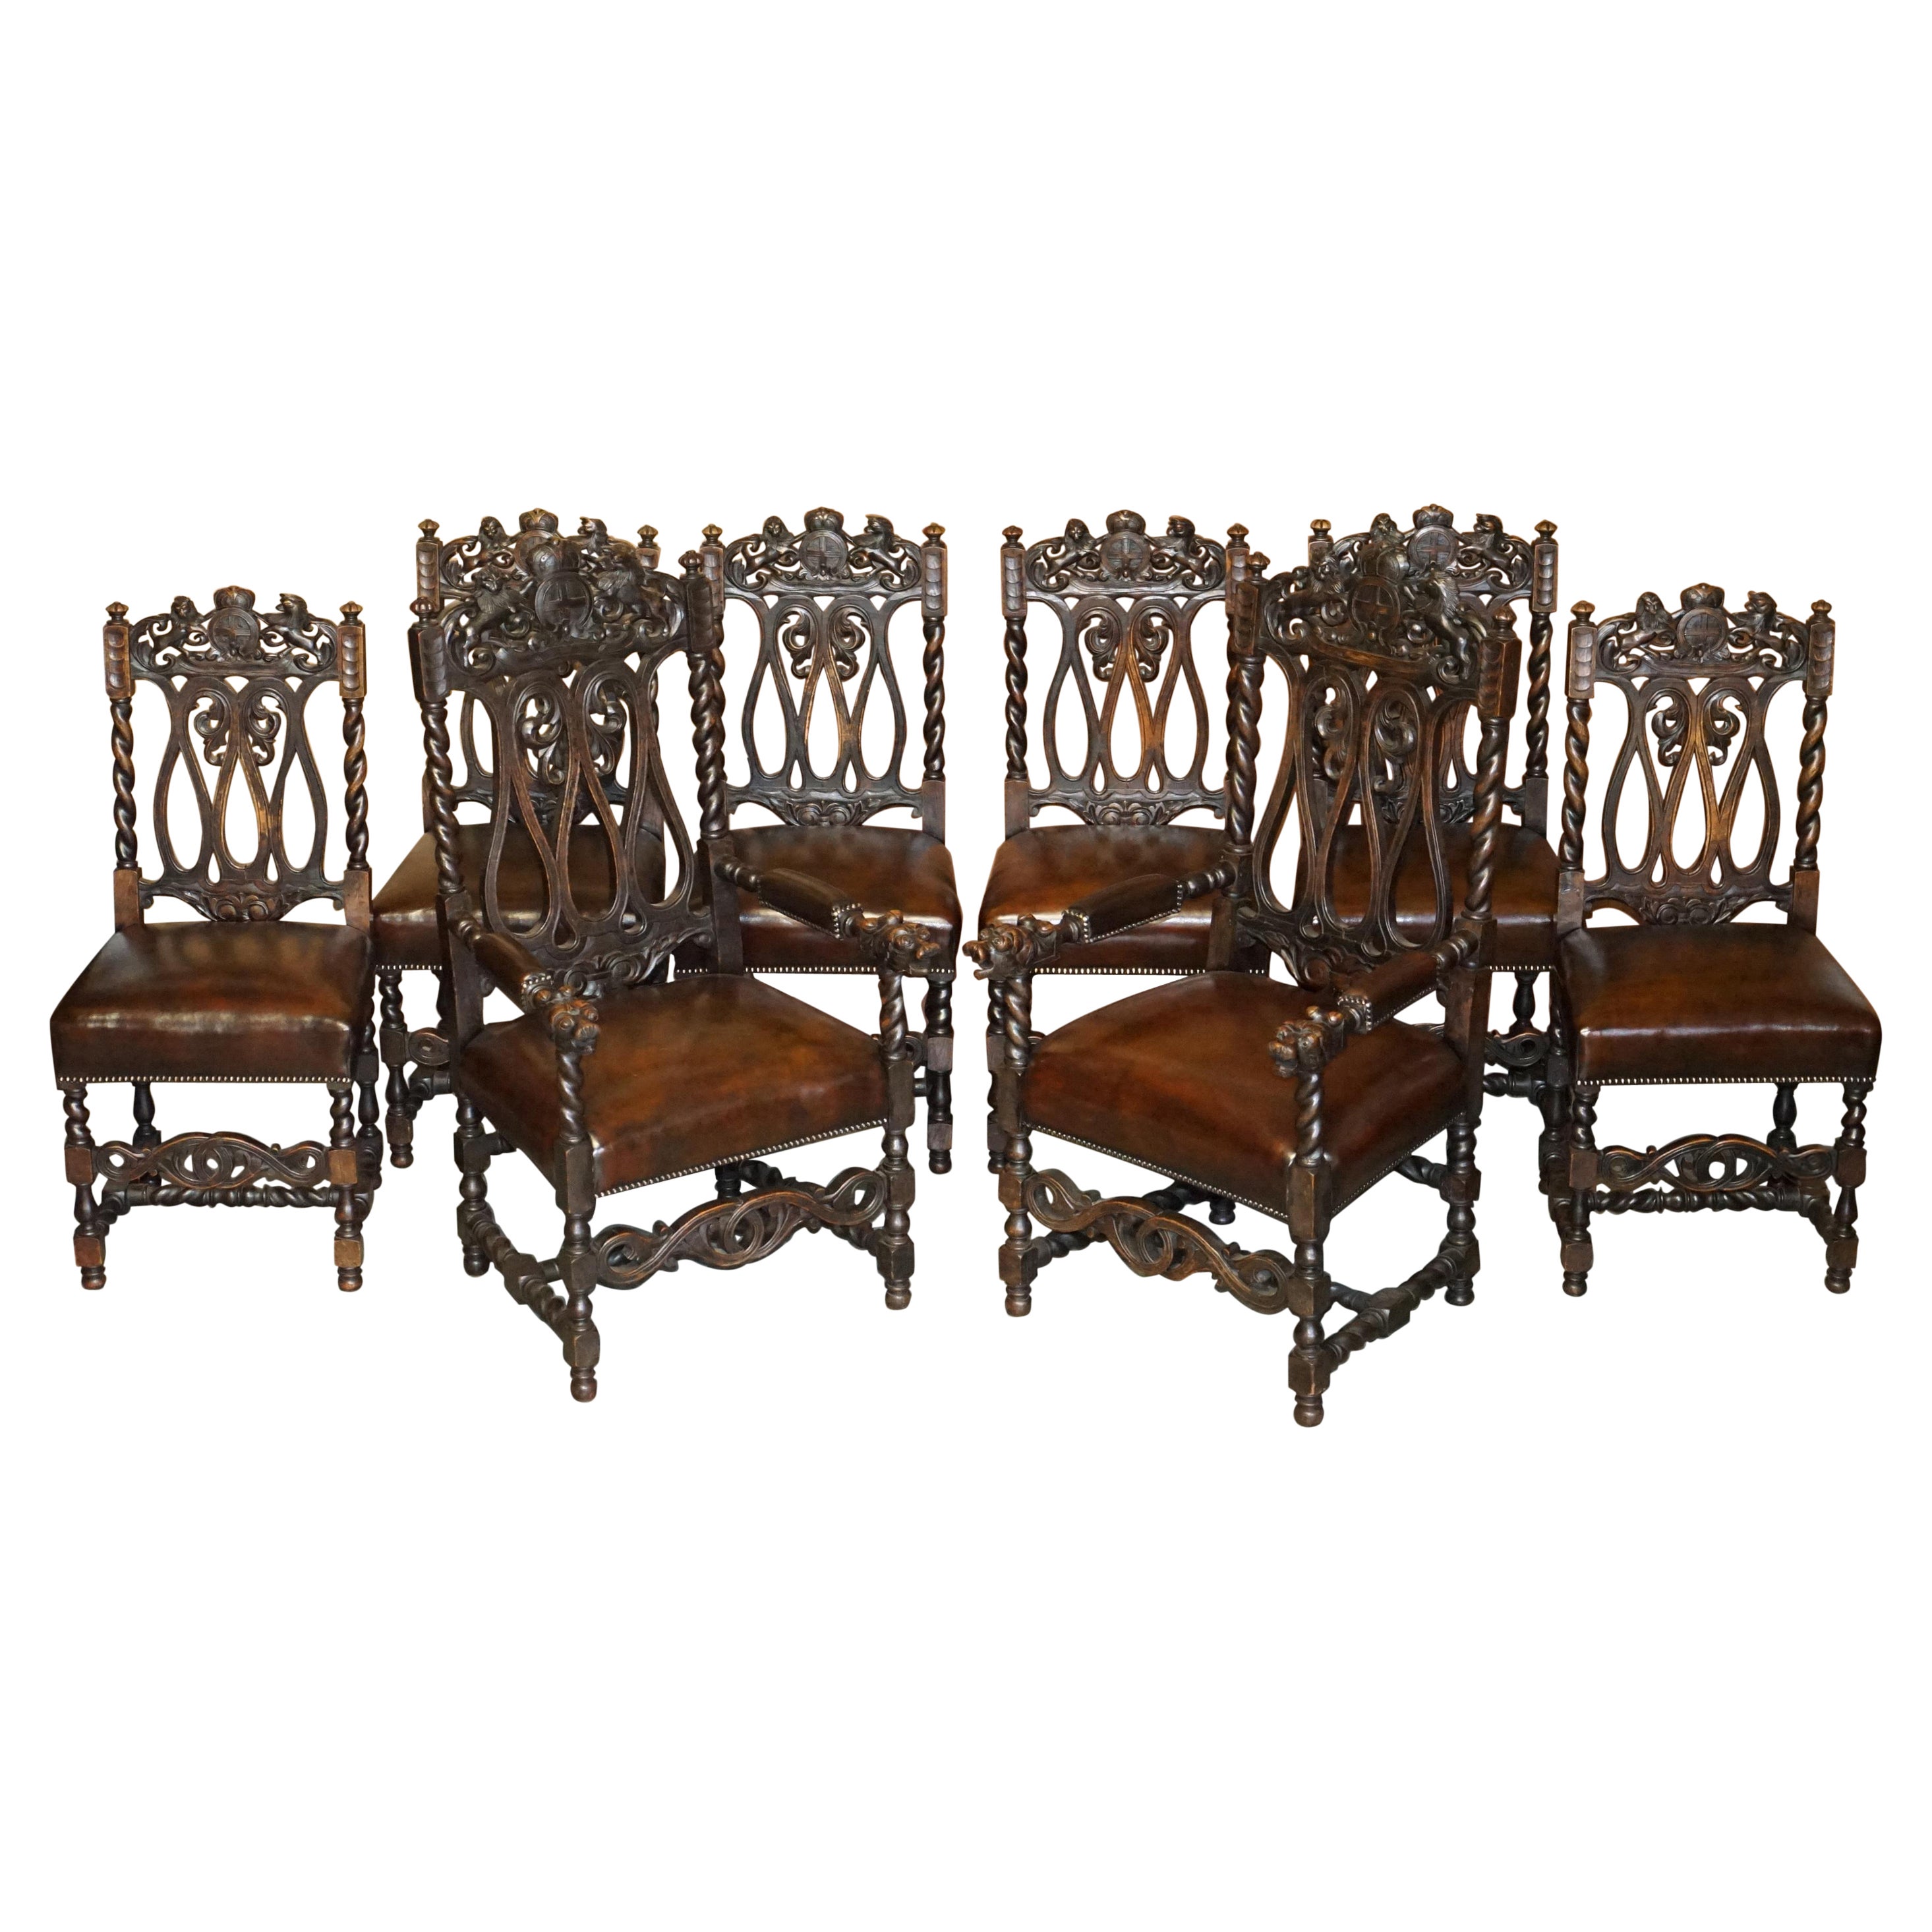 Eight Hand Carved Armorial Crest Coat of Arms Antique Jacobean Dining Chairs For Sale